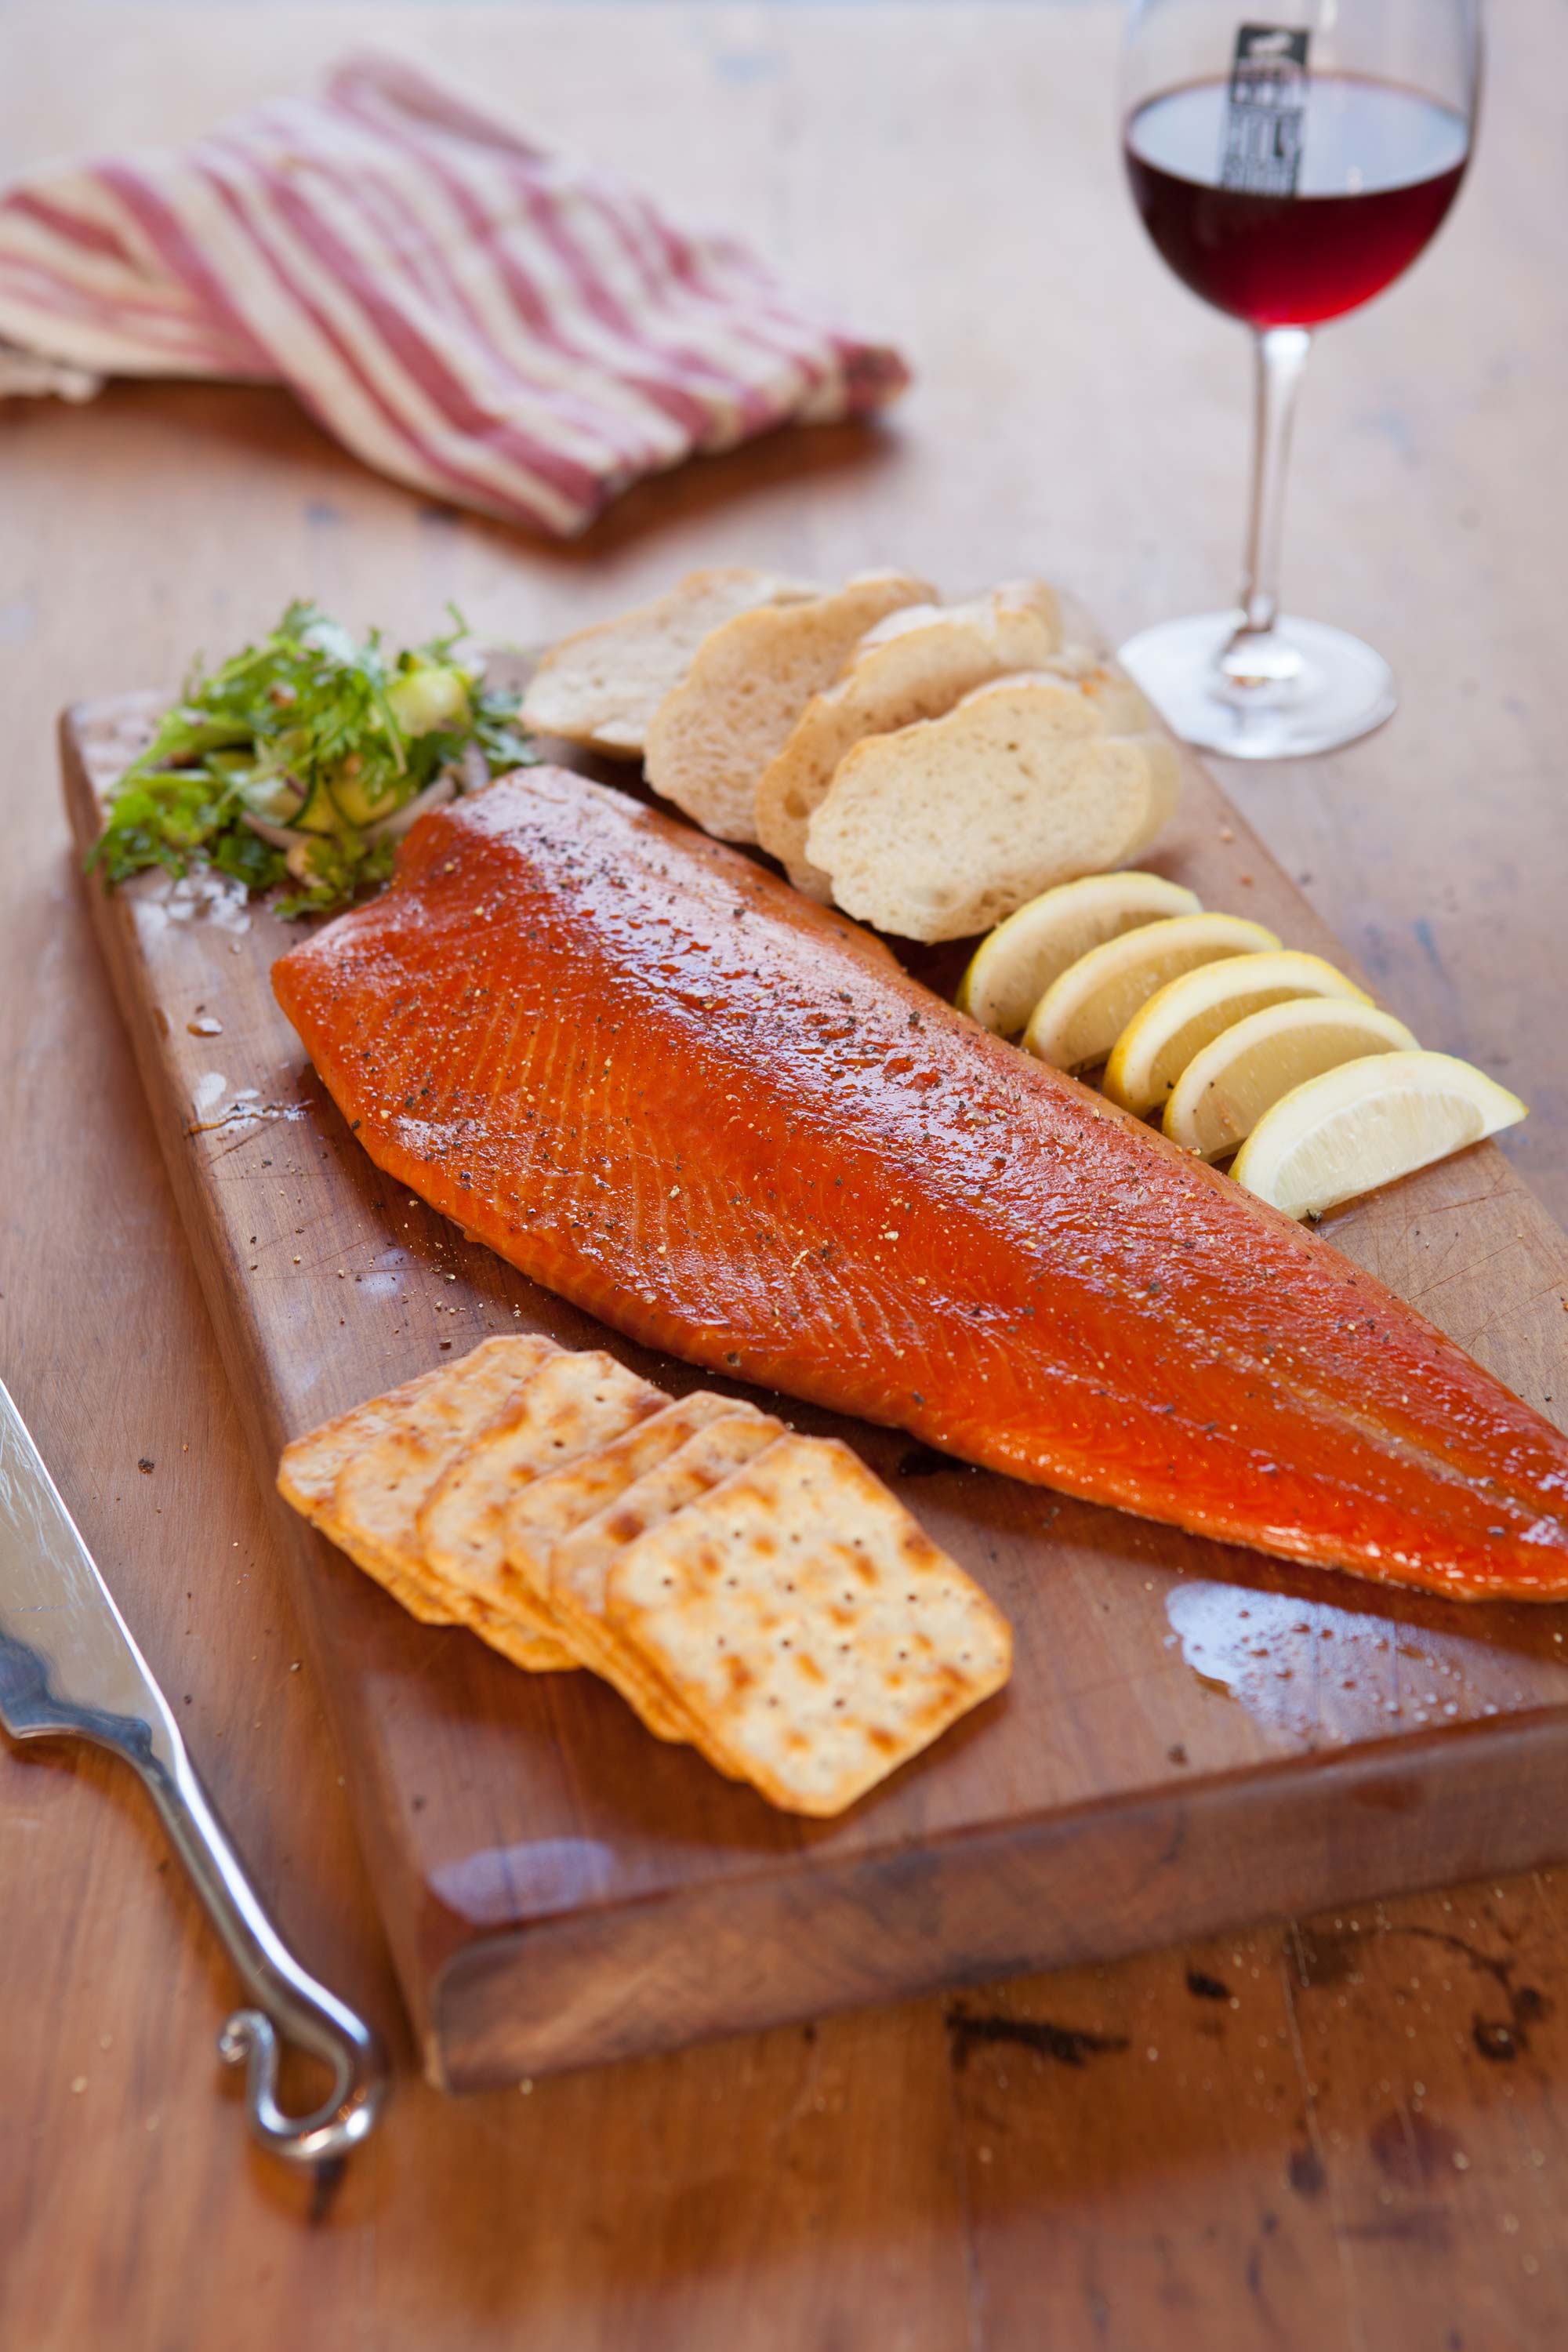 Smoked Salmon Side with Crackers